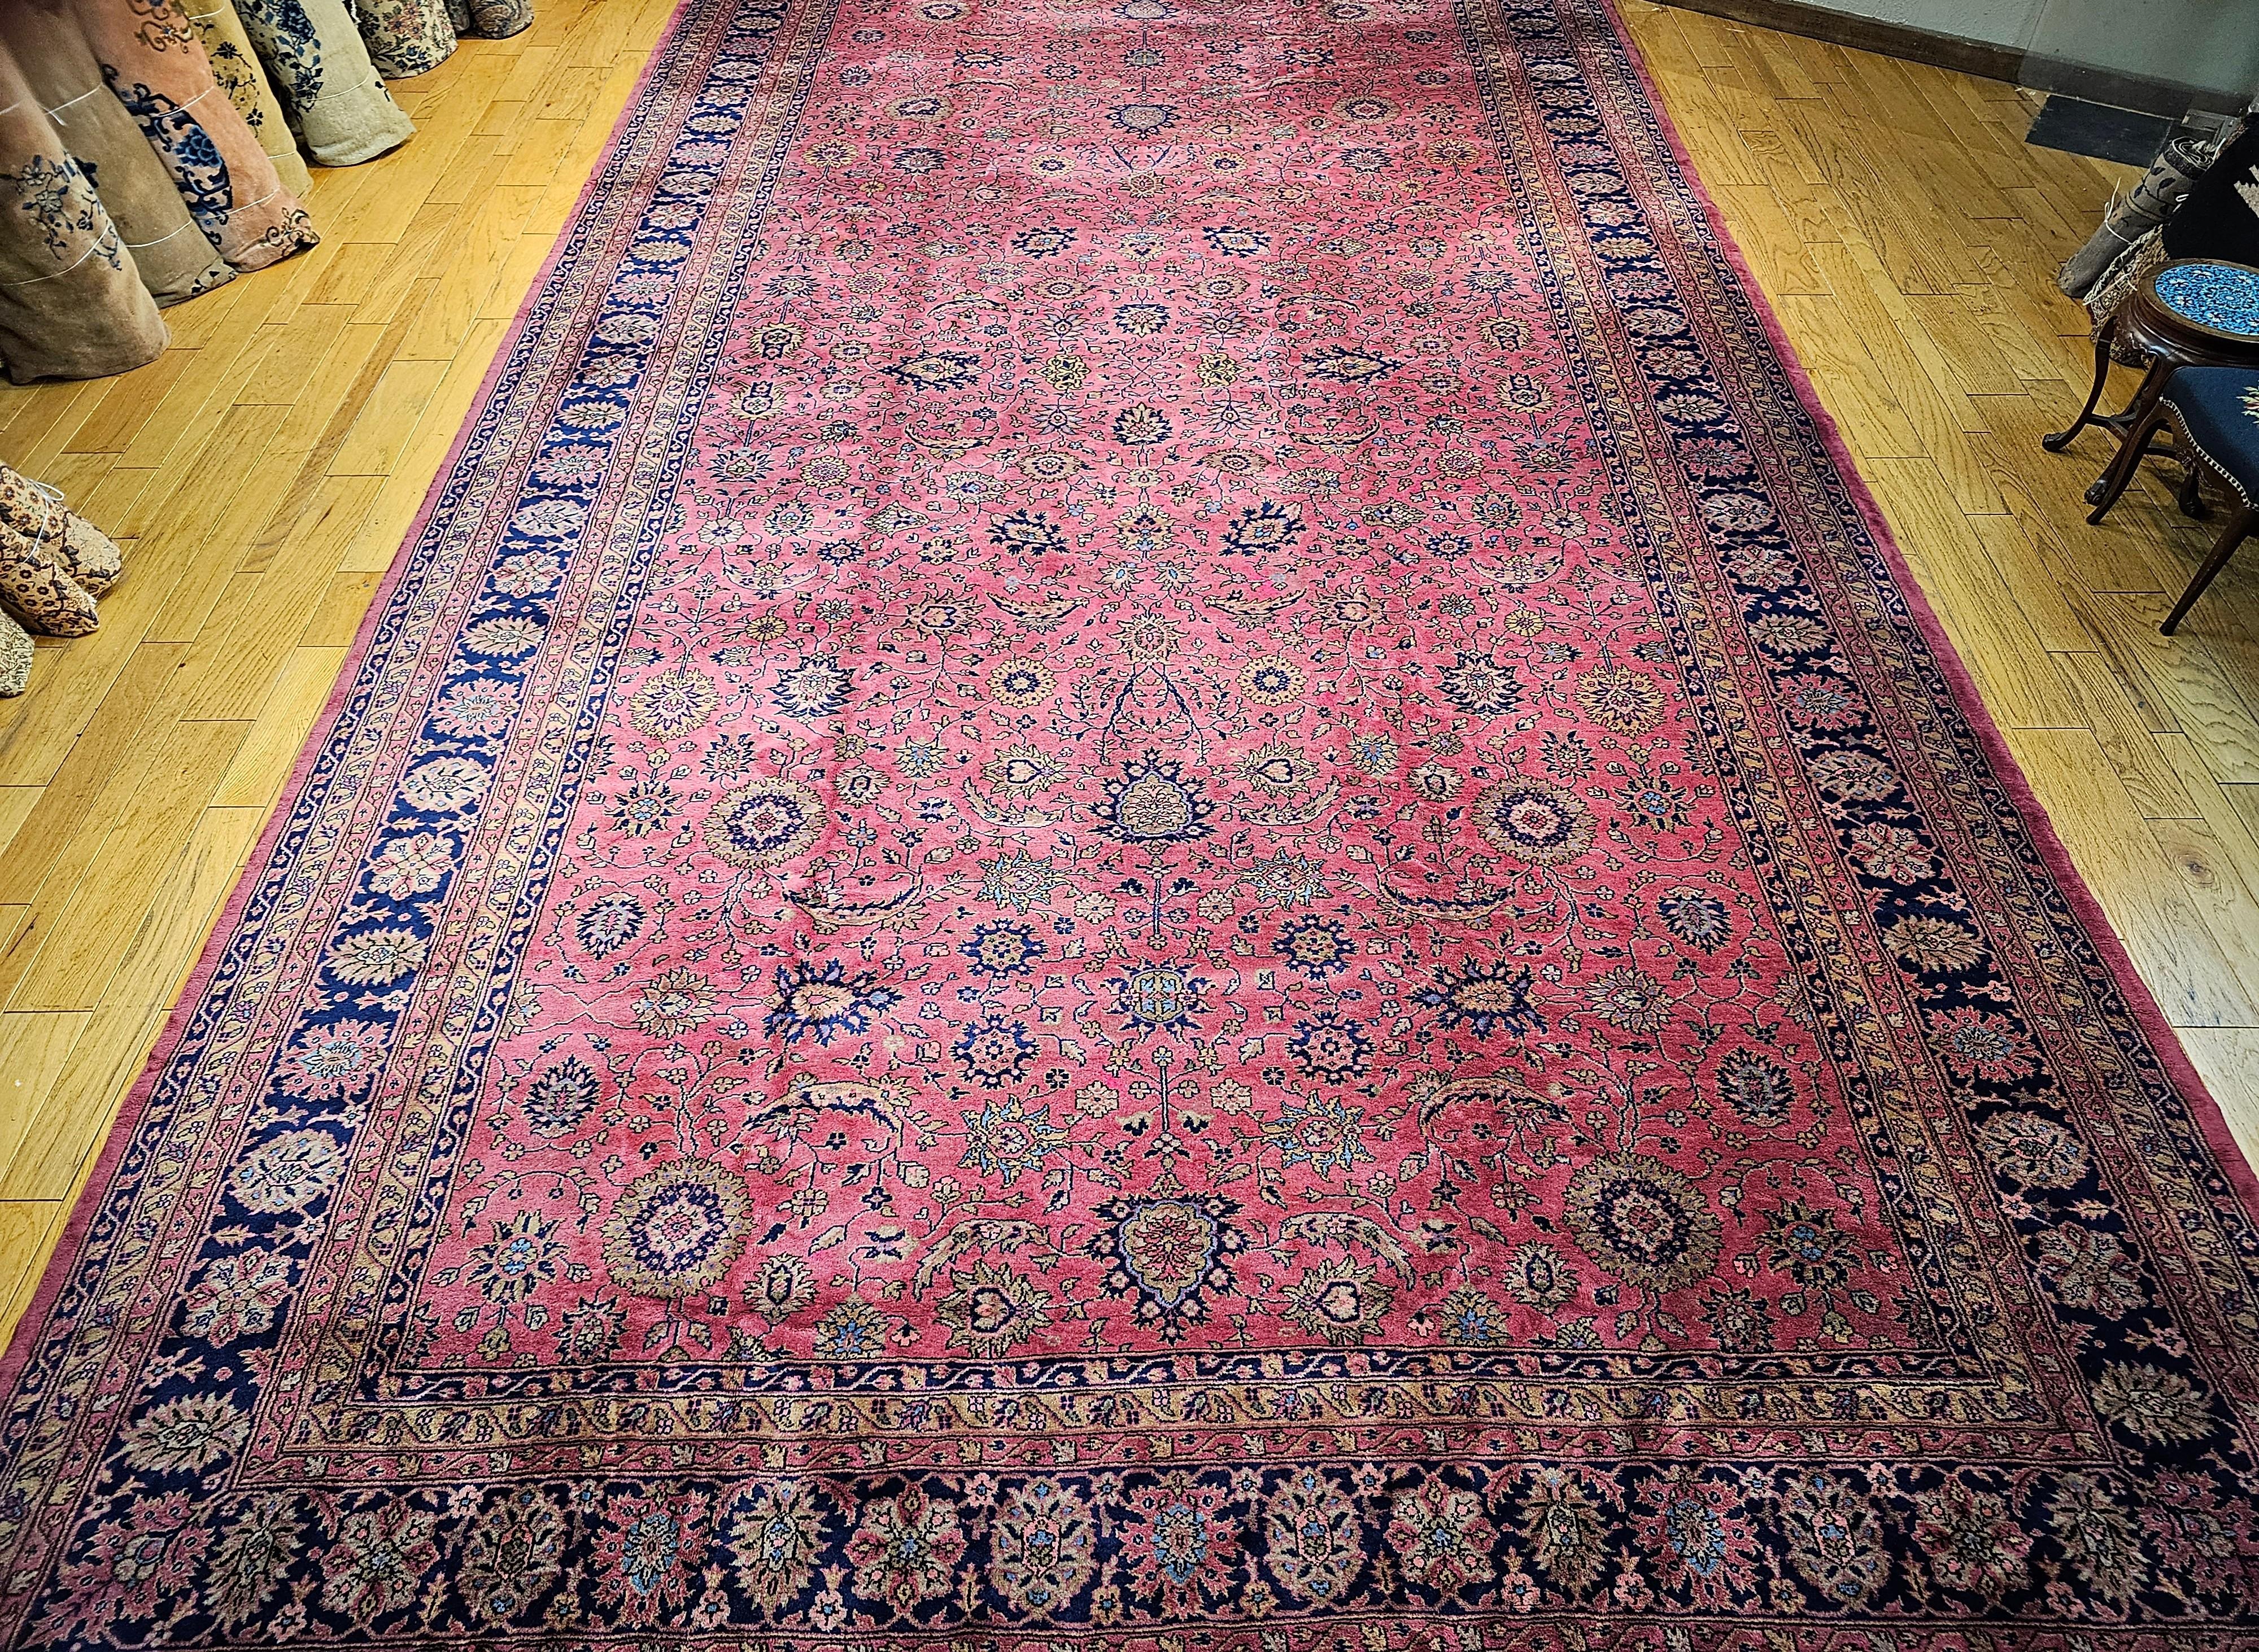 Vintage oversized Turkish rug in an all over large geometric pattern that resembles very closely with the designs of the vintage Persian Tabriz. Mahal Sultanabad, Manchester Kashan or Kerman carpets from the late 19th century. The rug has a